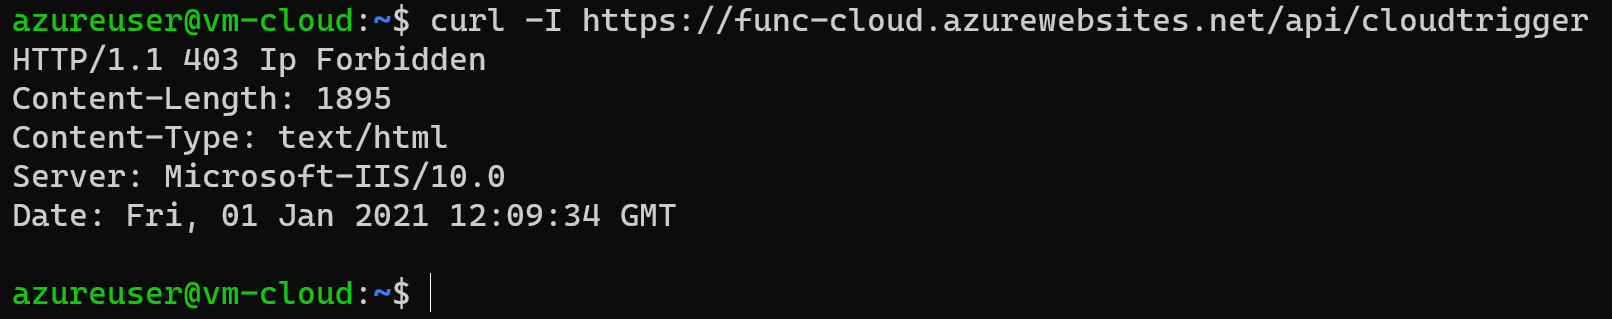 peering-function-cloud-forbidden-shell-vm-oncloud.png